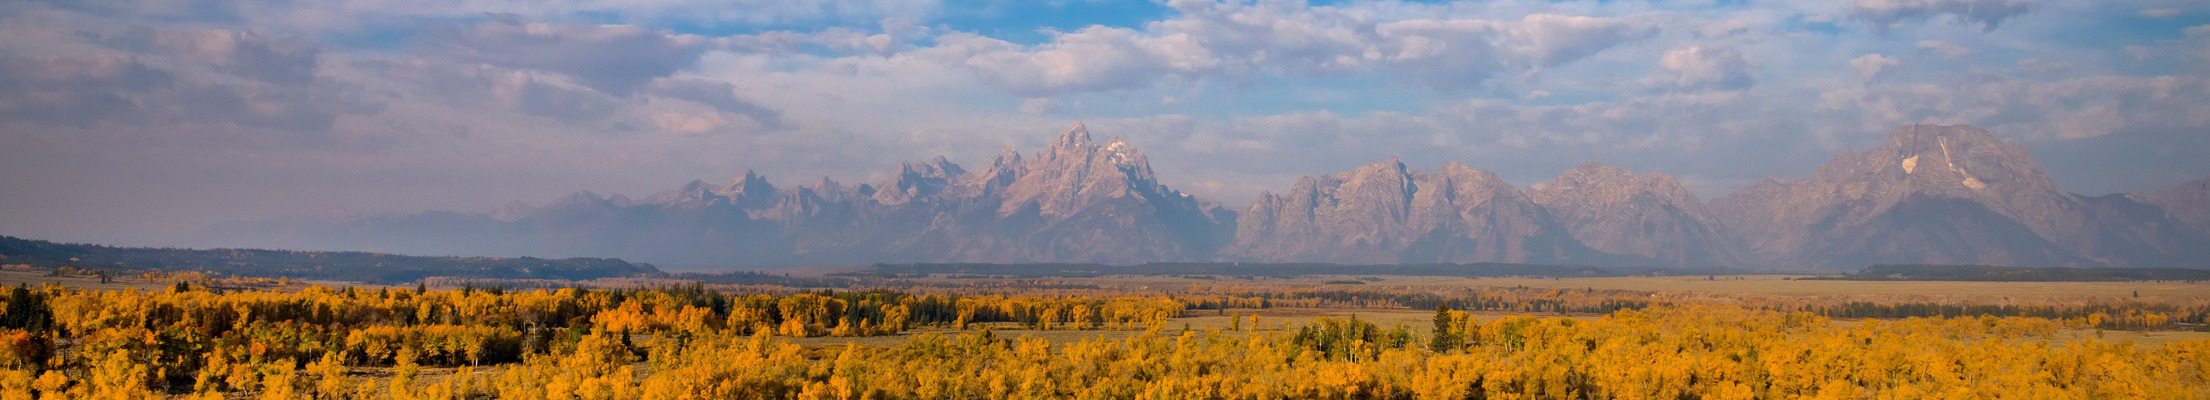 Wyoming landscape with fall trees and mountains